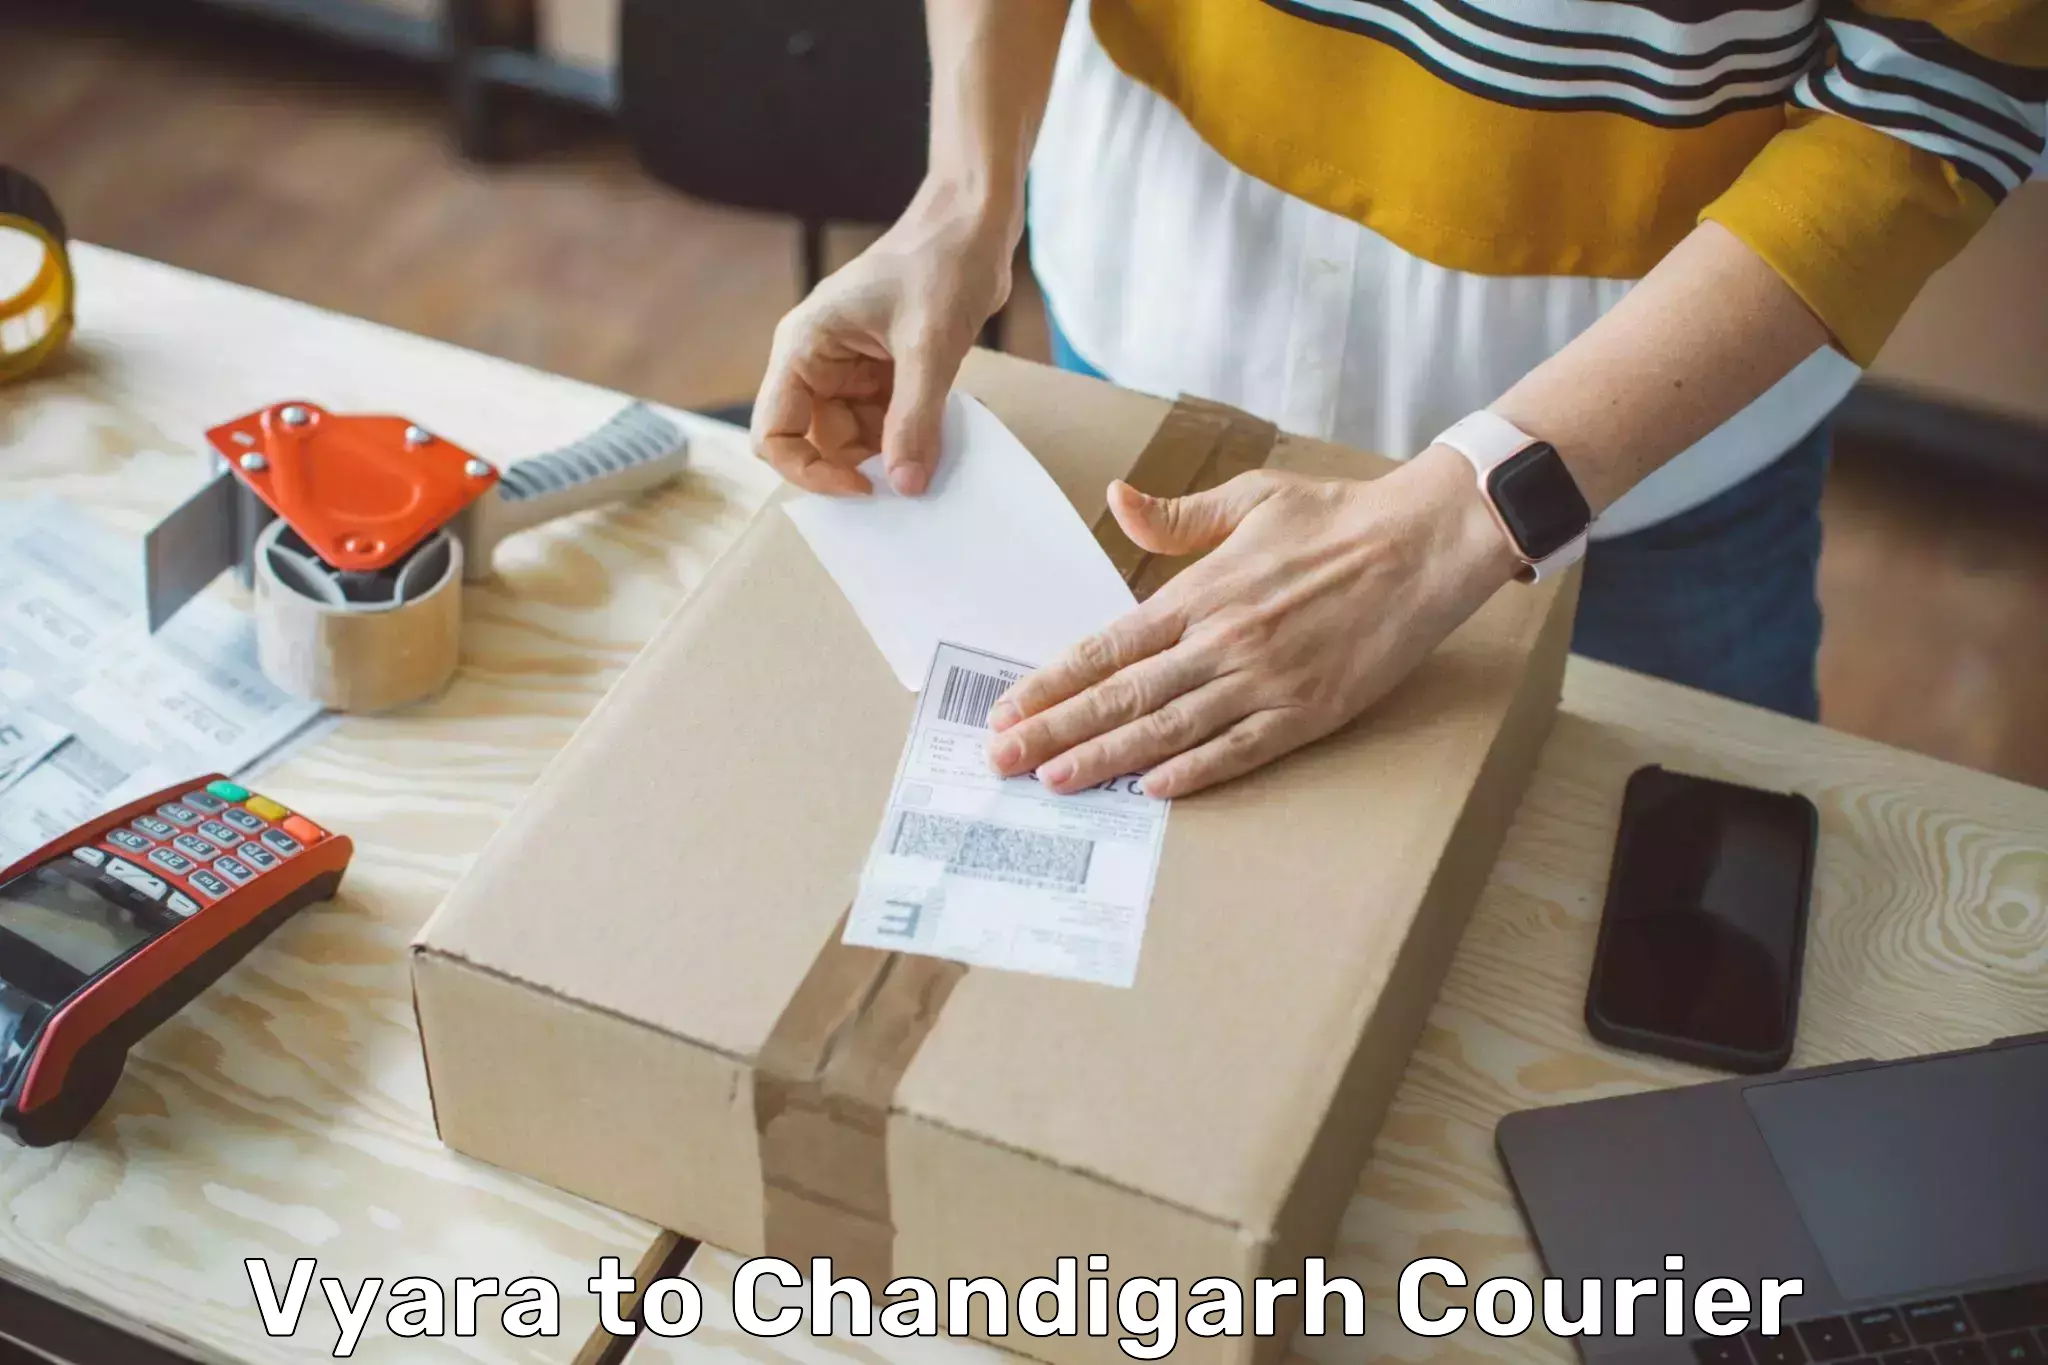 Rapid shipping services Vyara to Chandigarh